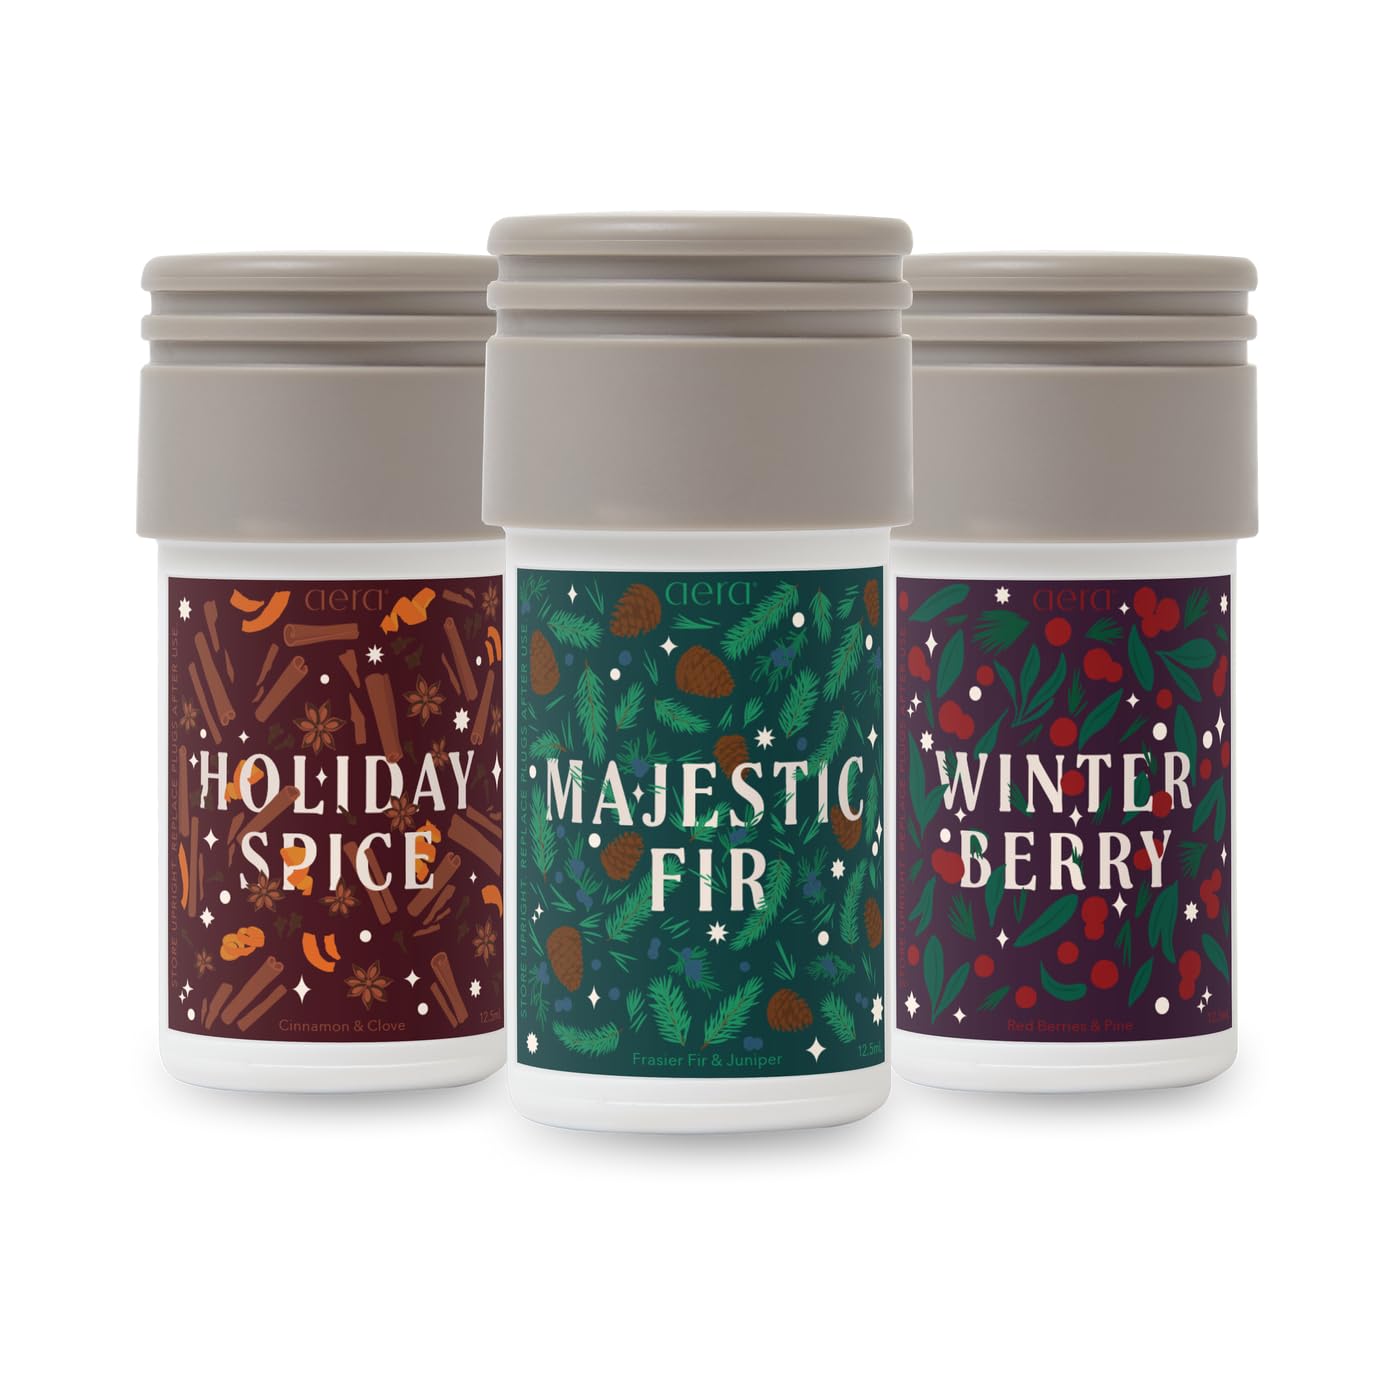 Aera Peace On Earth Holiday Mini Bundle - Includes Majestic Fir, Holiday Spice and Winter Berry - Works with Aera Mini Diffuser, Mini Scent Capsule Size